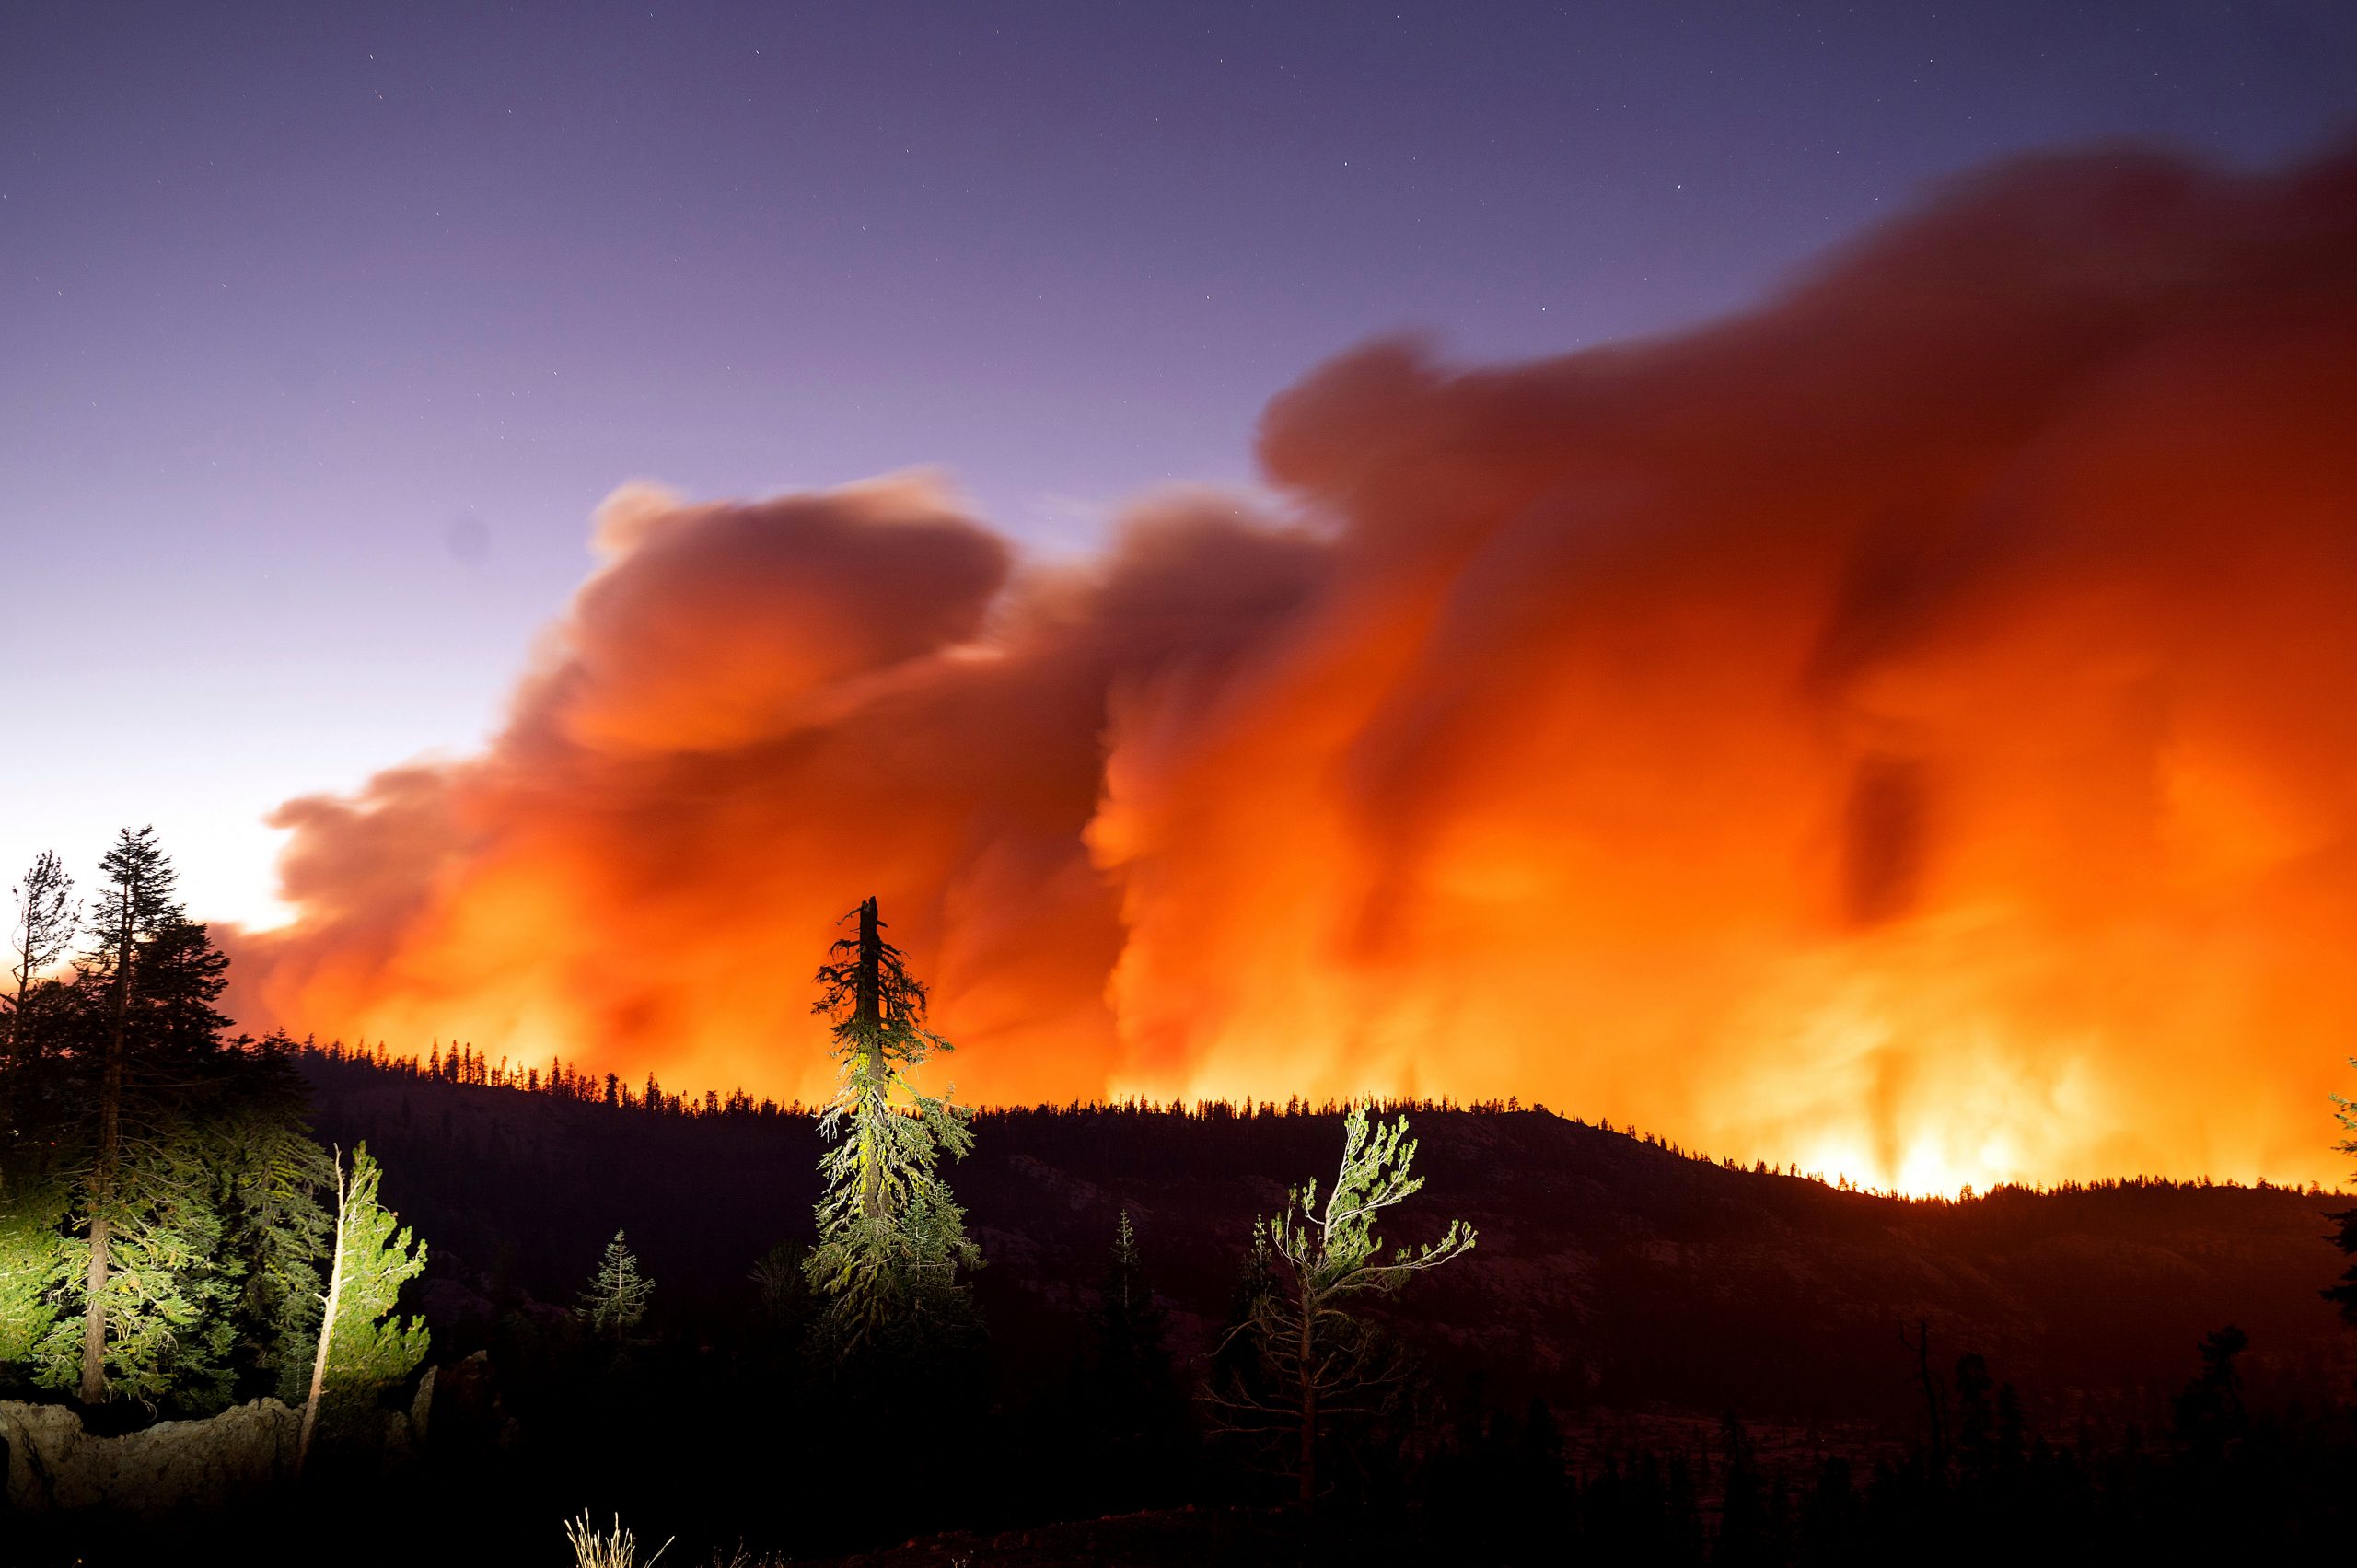 Colorado wildfire: Evacuation orders withdrawn after residents flee NCAR Fire